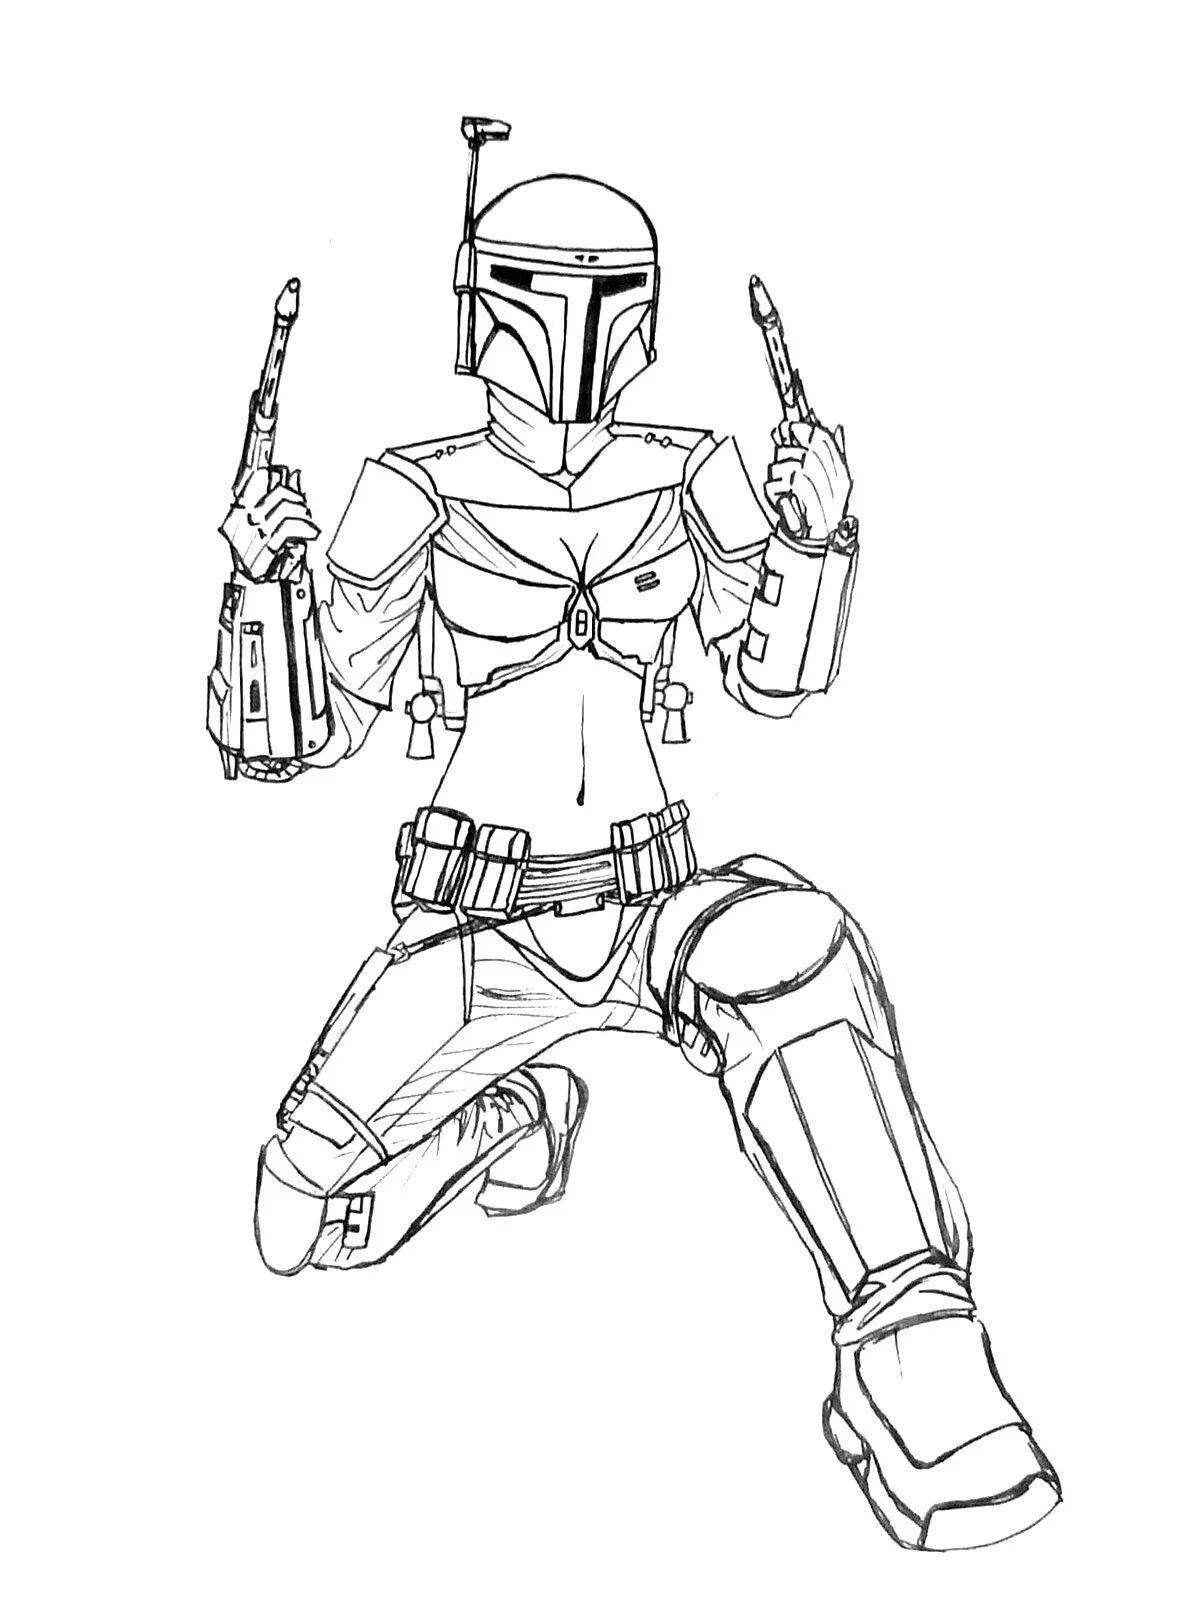 Boba fett's intricate coloring